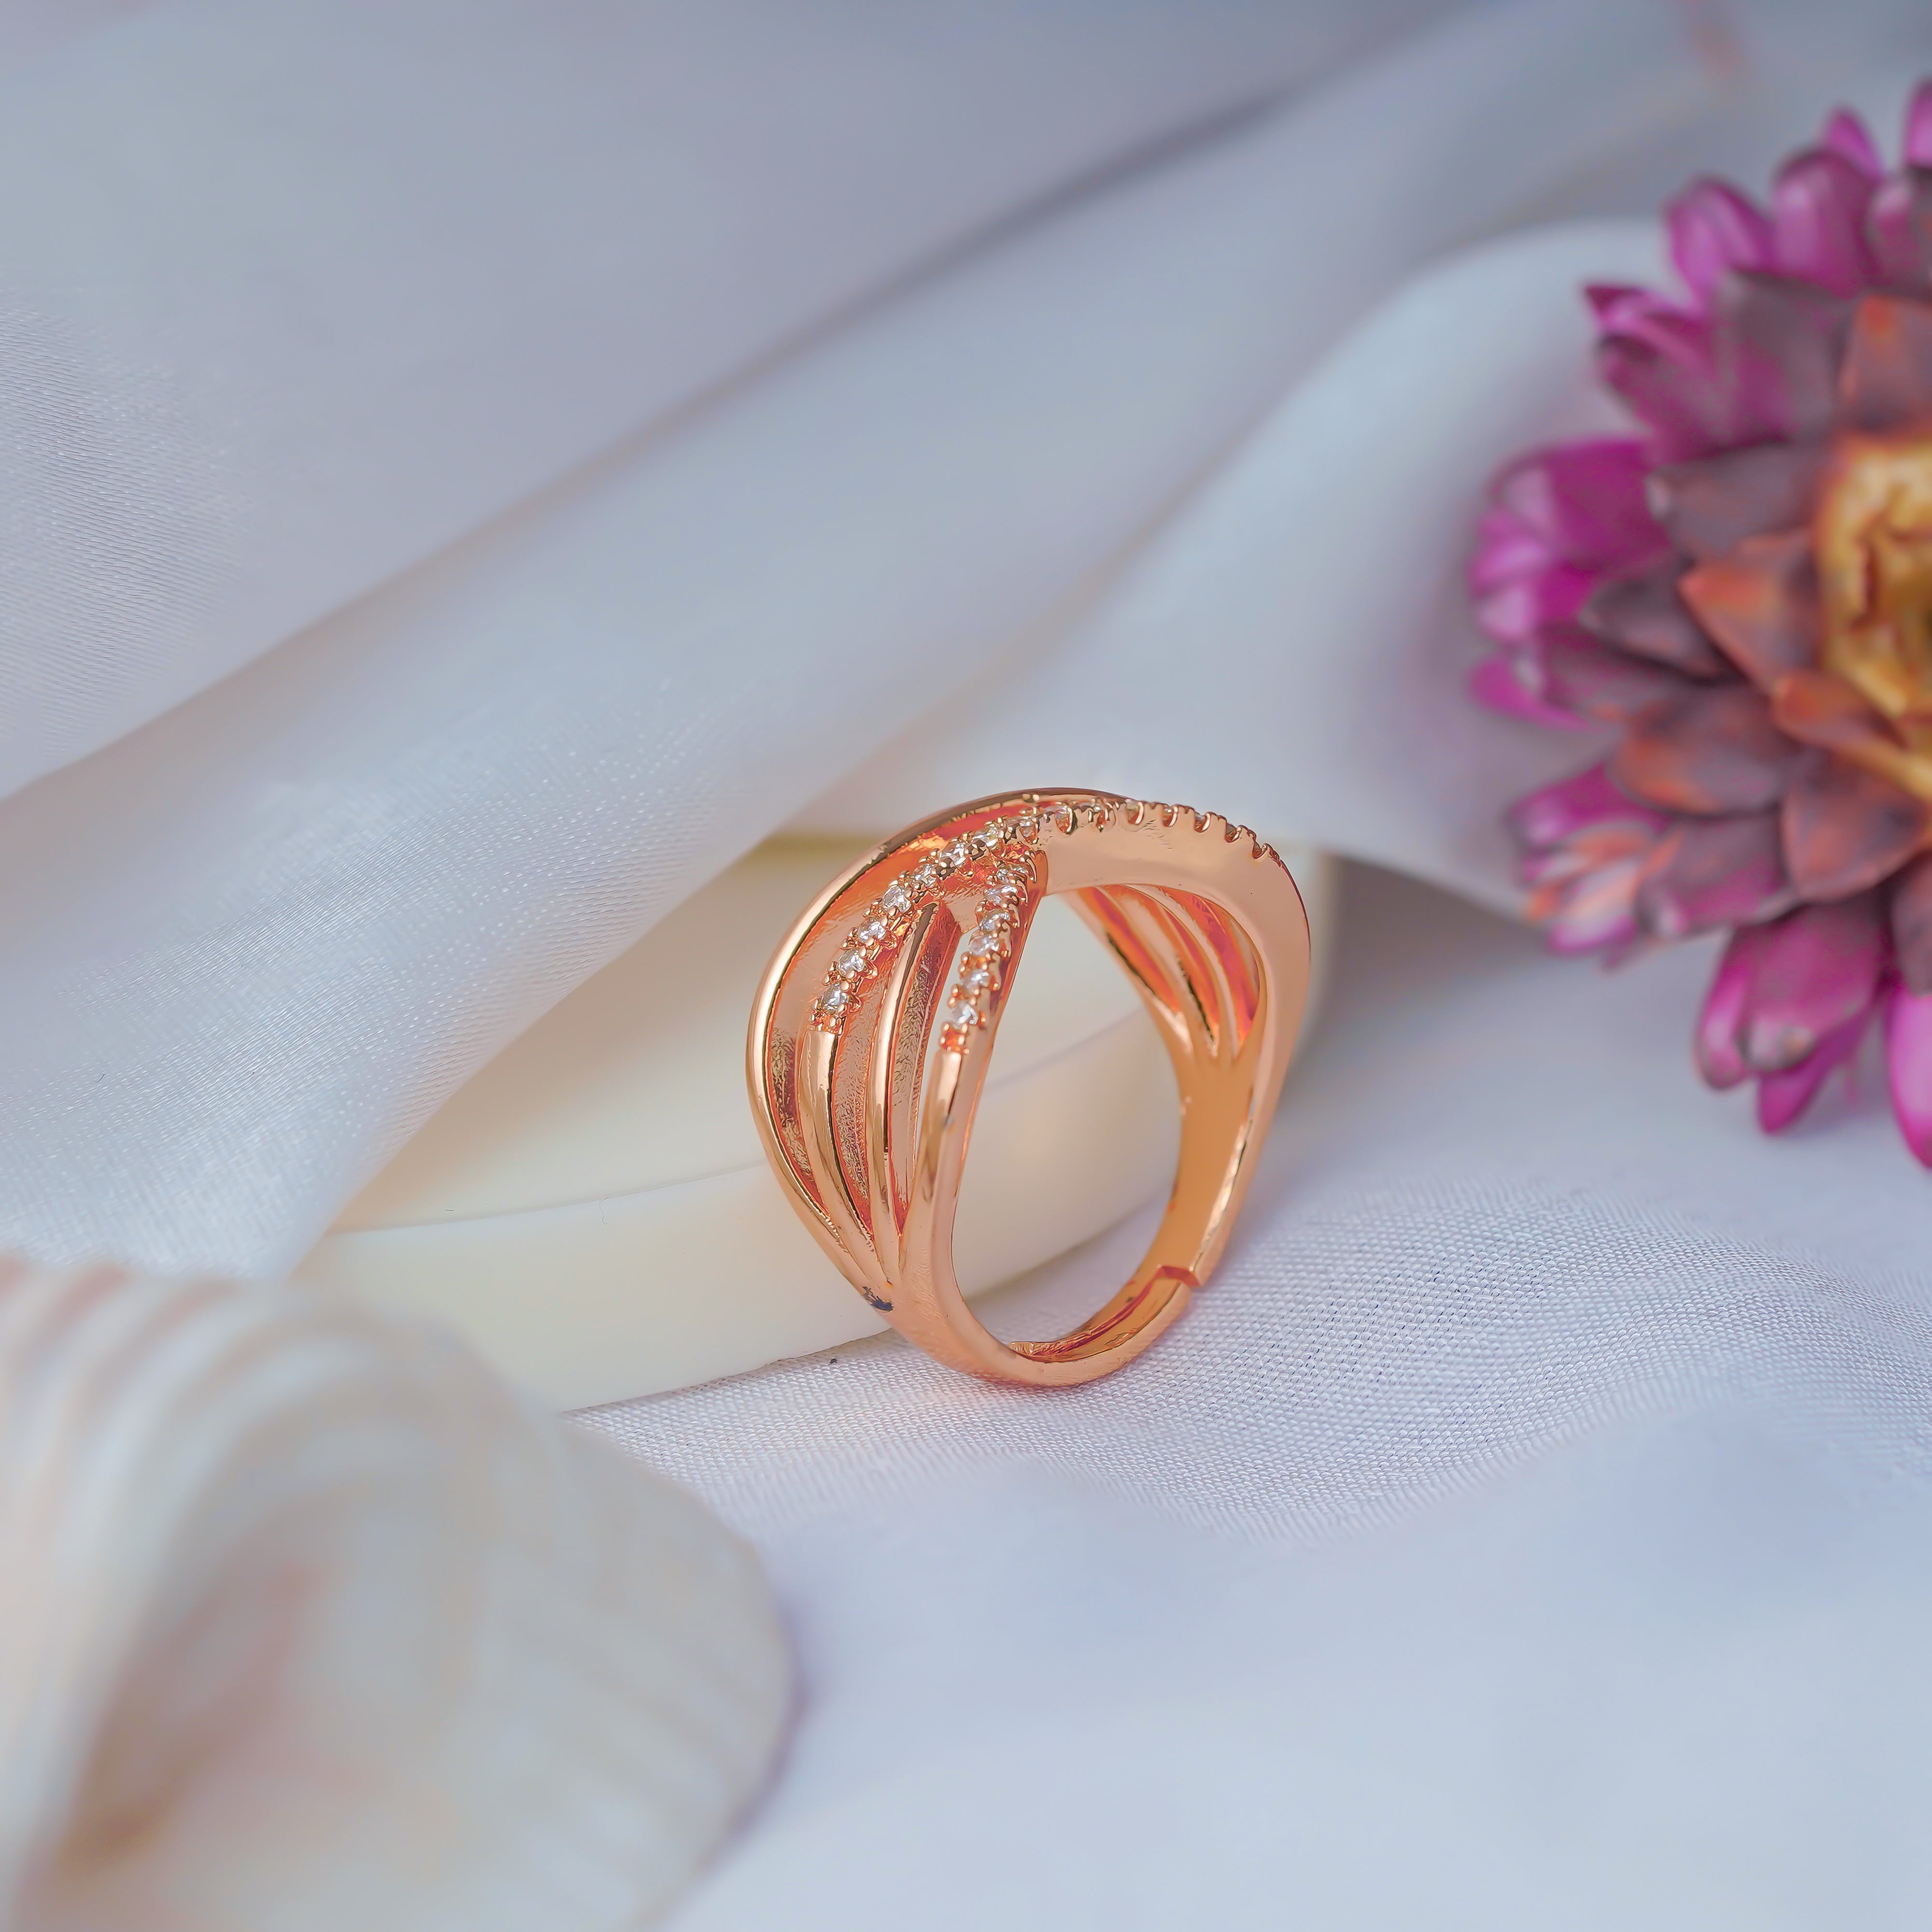 Fashion Forward: Rose Gold Statement Ring - Artificial Beauty